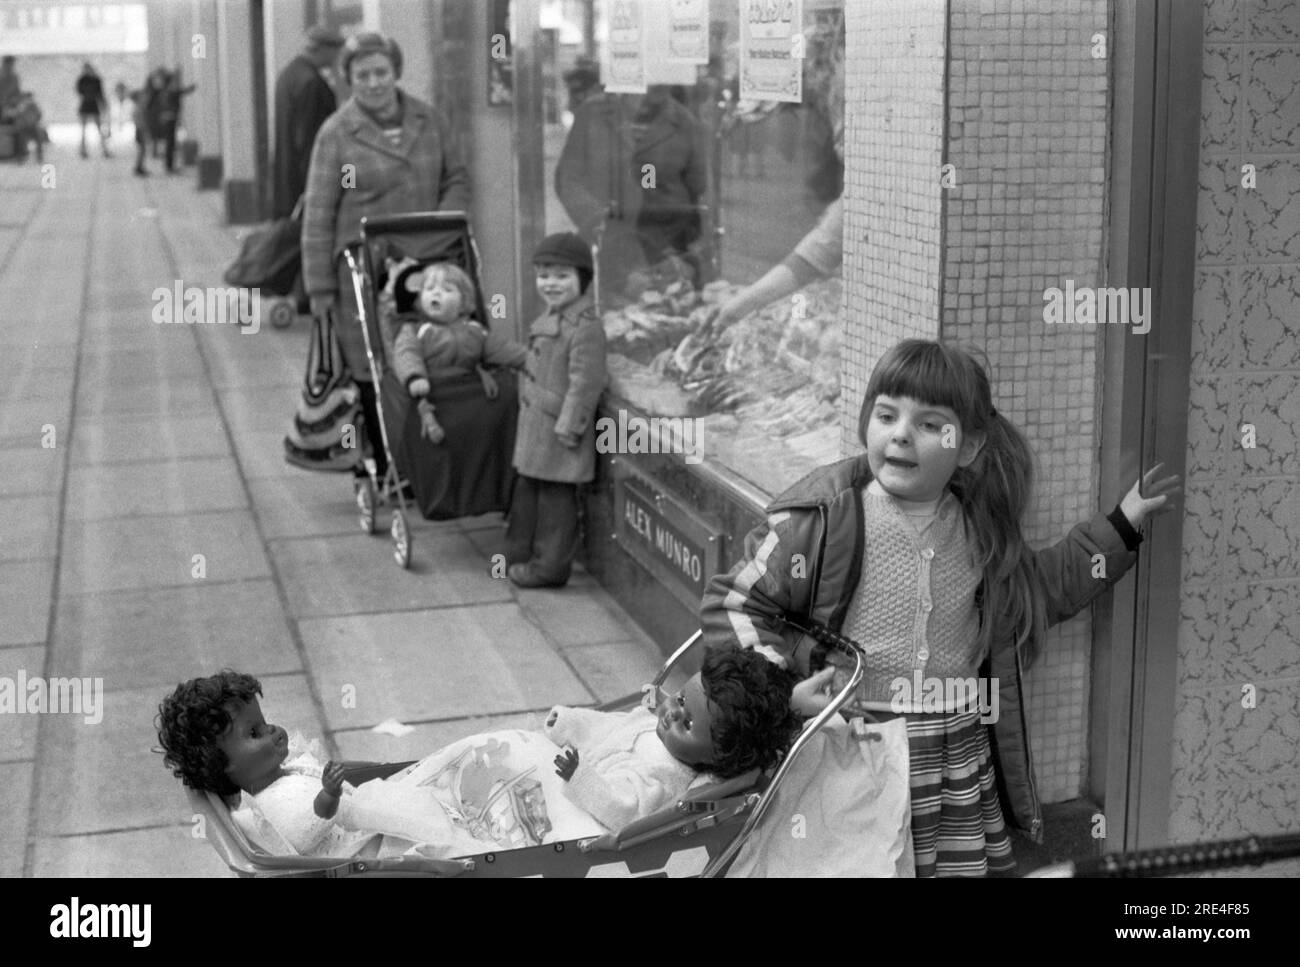 Young white girl playing with two black child's dolls in a toy pram Glasgow. Scotland UK.  She is waiting outside a shop while her mother is inside doing the shopping. 1979 HOMER SYKES Stock Photo